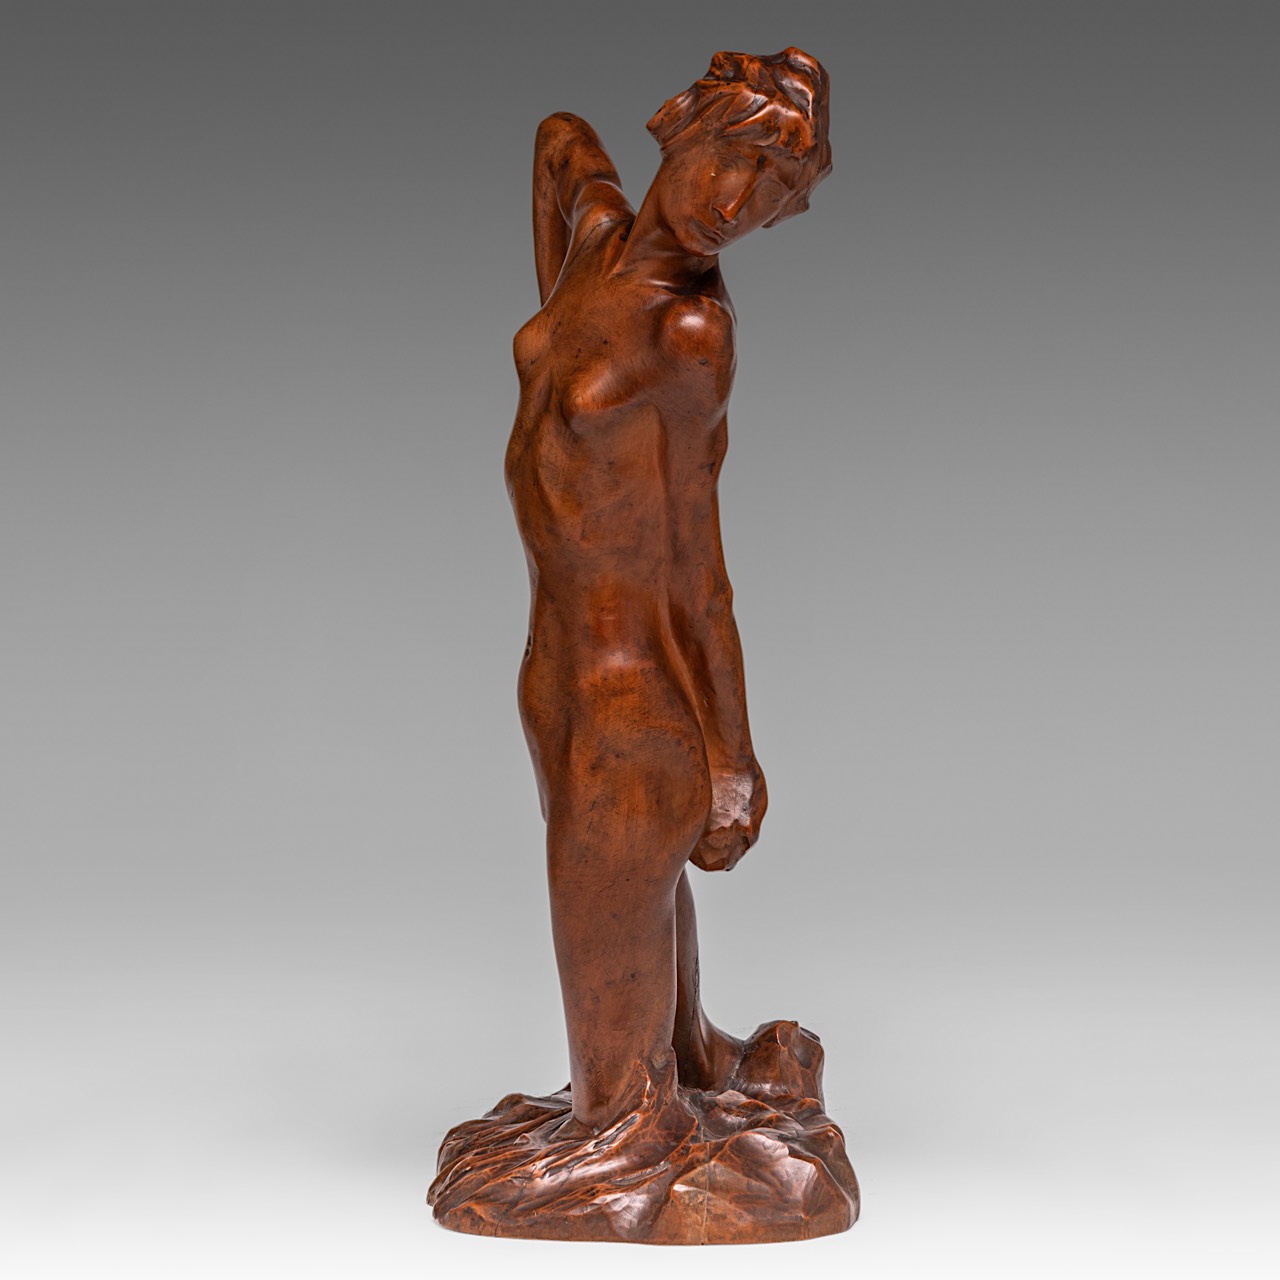 George Minne (1866-1941), 'Baigneuse I', carved wood, H 40 cm - Image 3 of 10